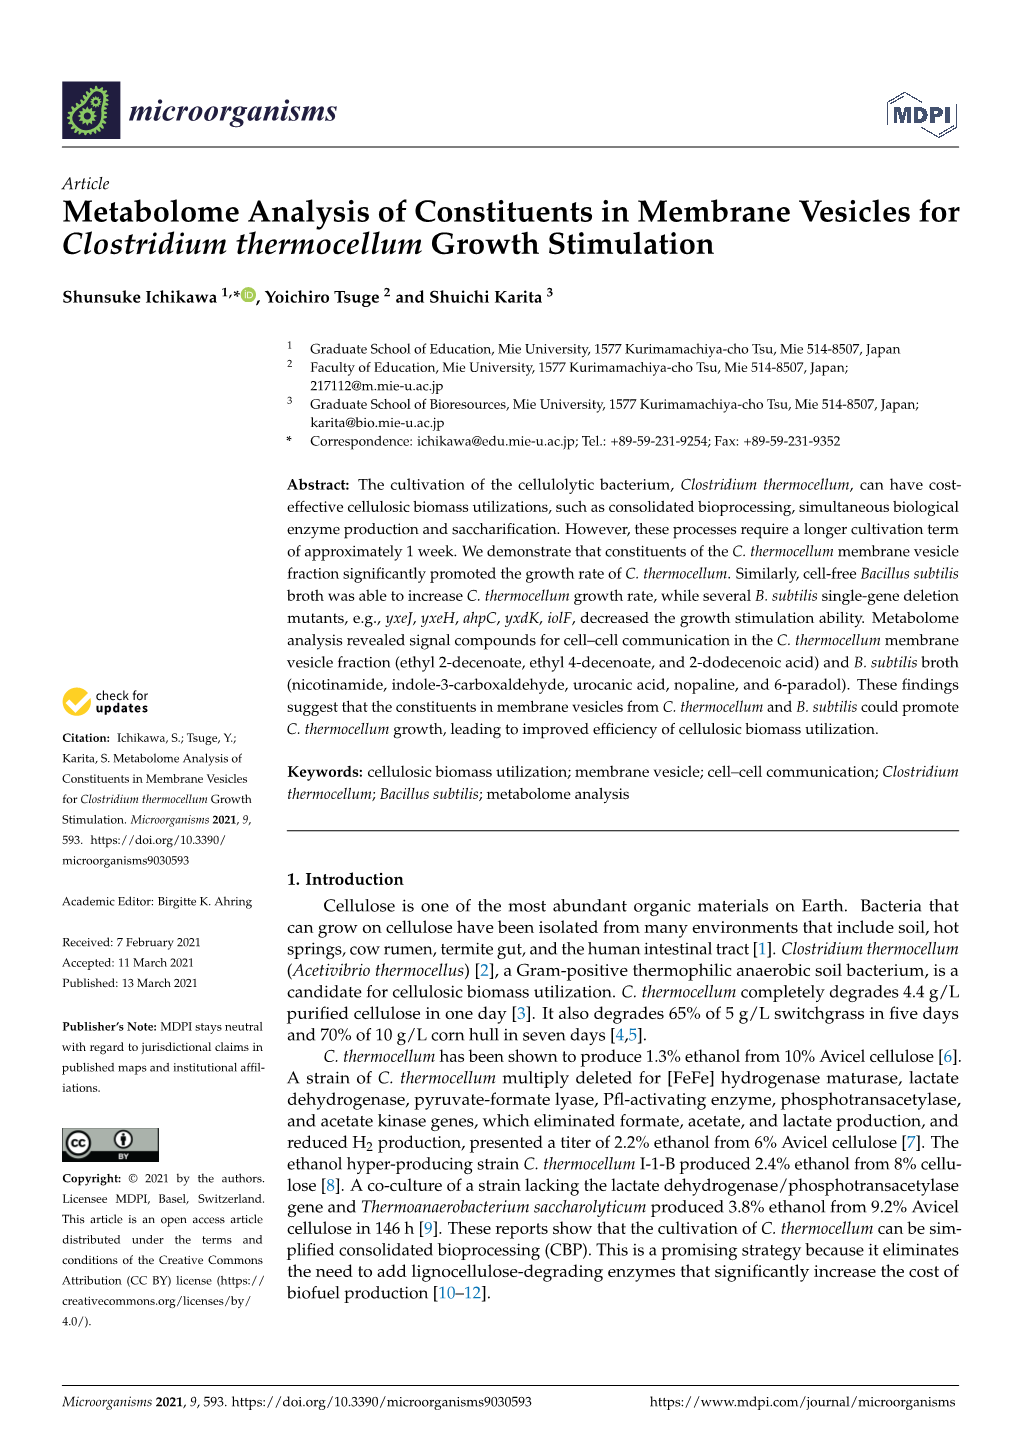 Metabolome Analysis of Constituents in Membrane Vesicles for Clostridium Thermocellum Growth Stimulation